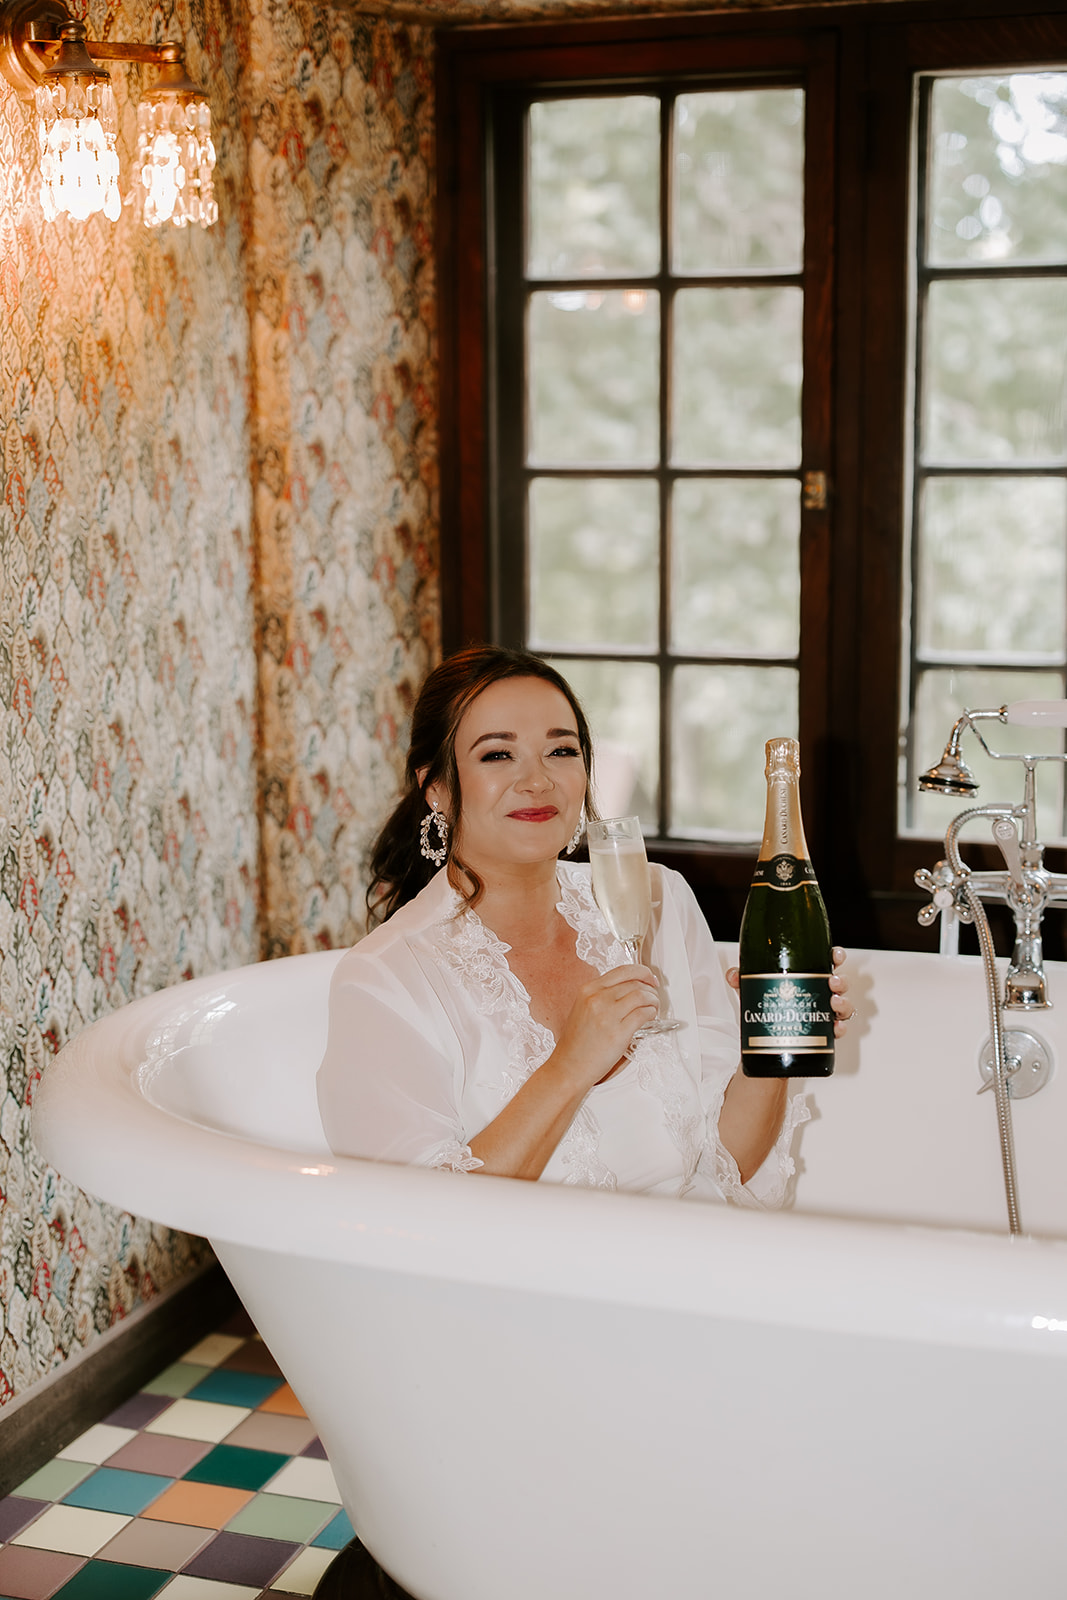 bride celebrates with a glass of champagne in the bath tub 